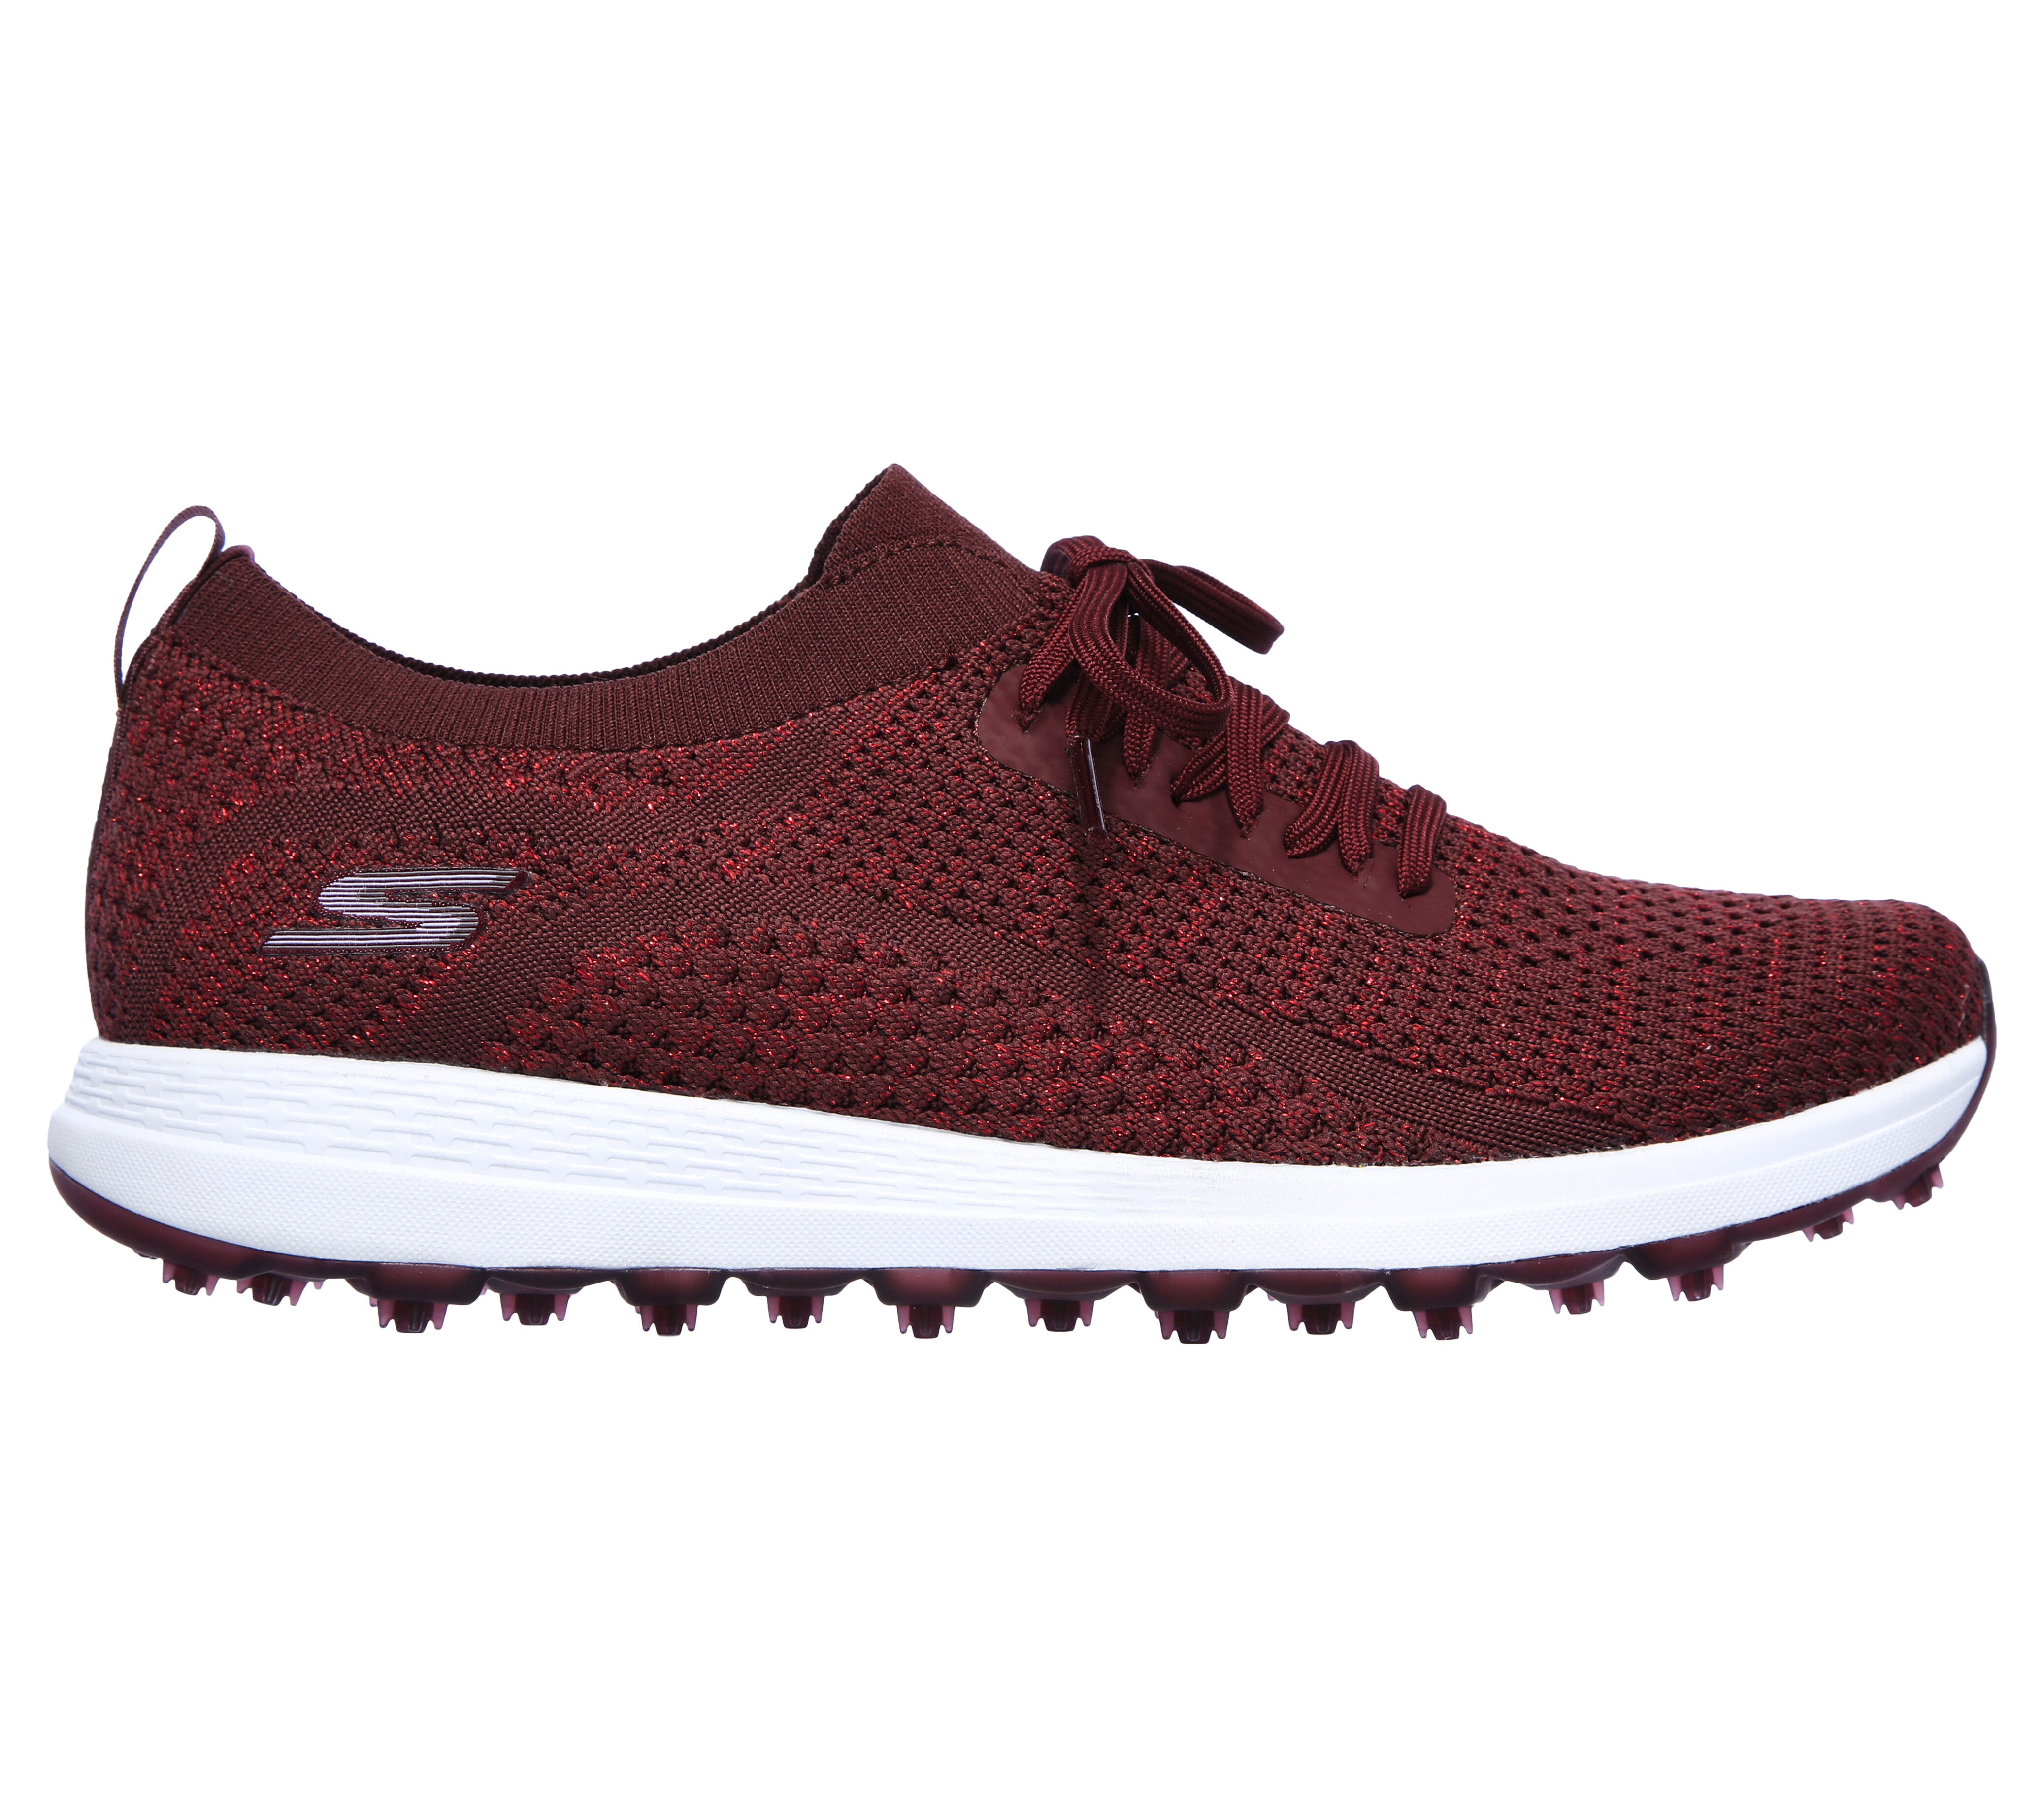 skechers golf shoes canada